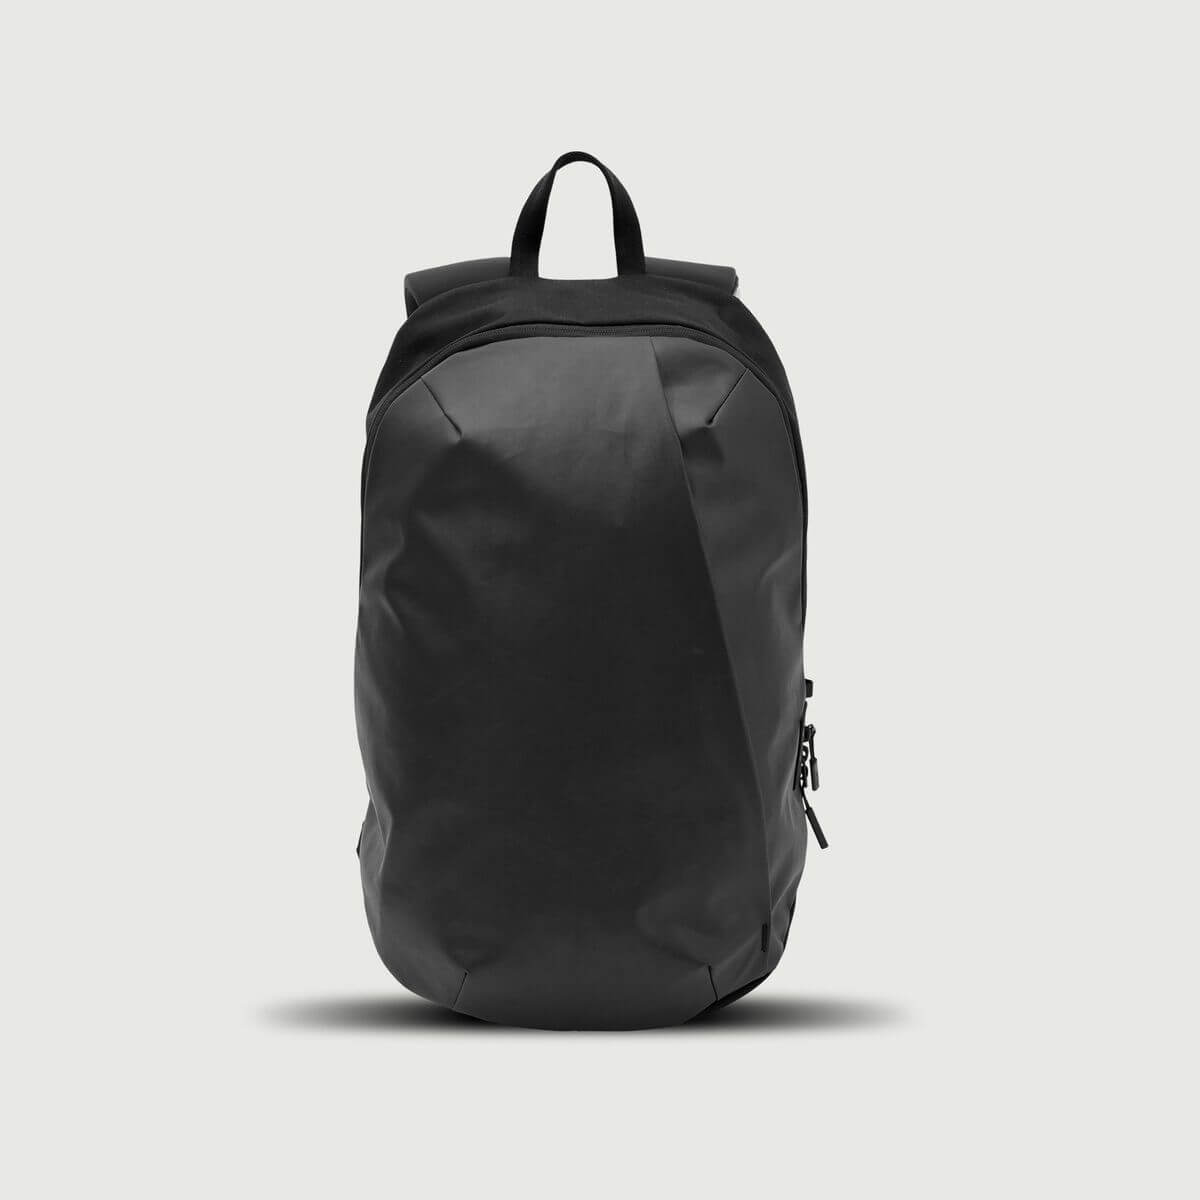 WEXLEY／STEM BACKPACK　バリスティックナイロン